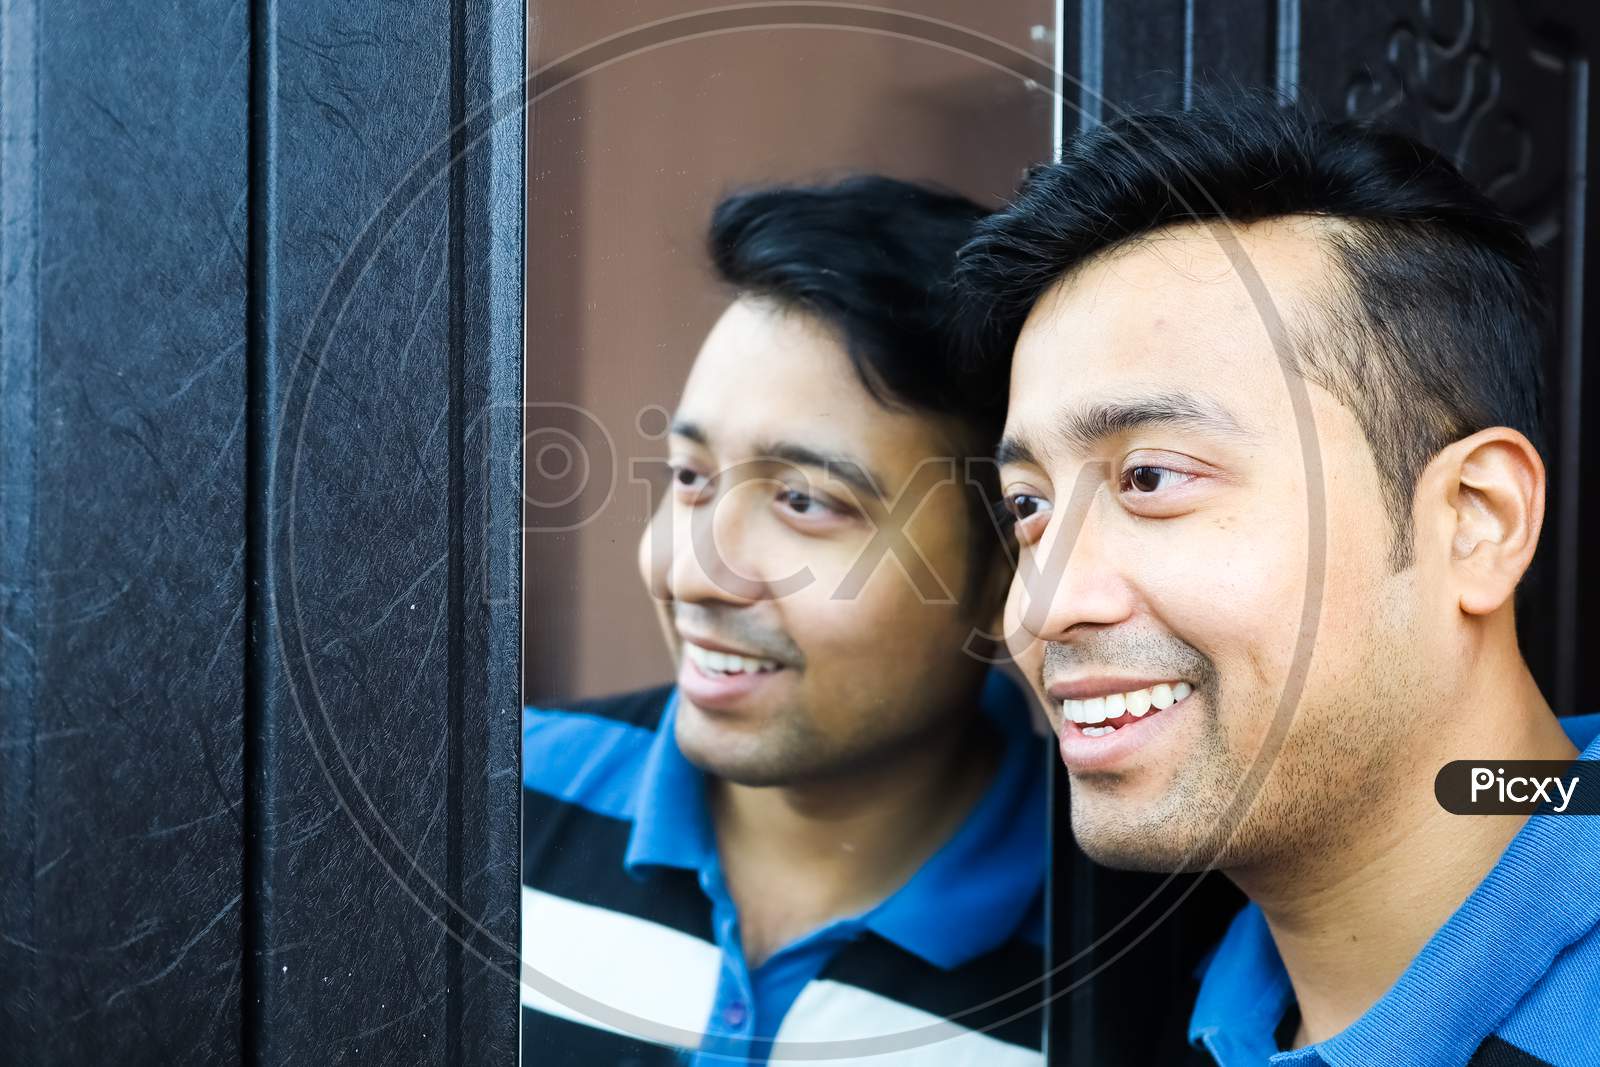 A Man I And His Reflection In Mirror Smiling In Happy Mood